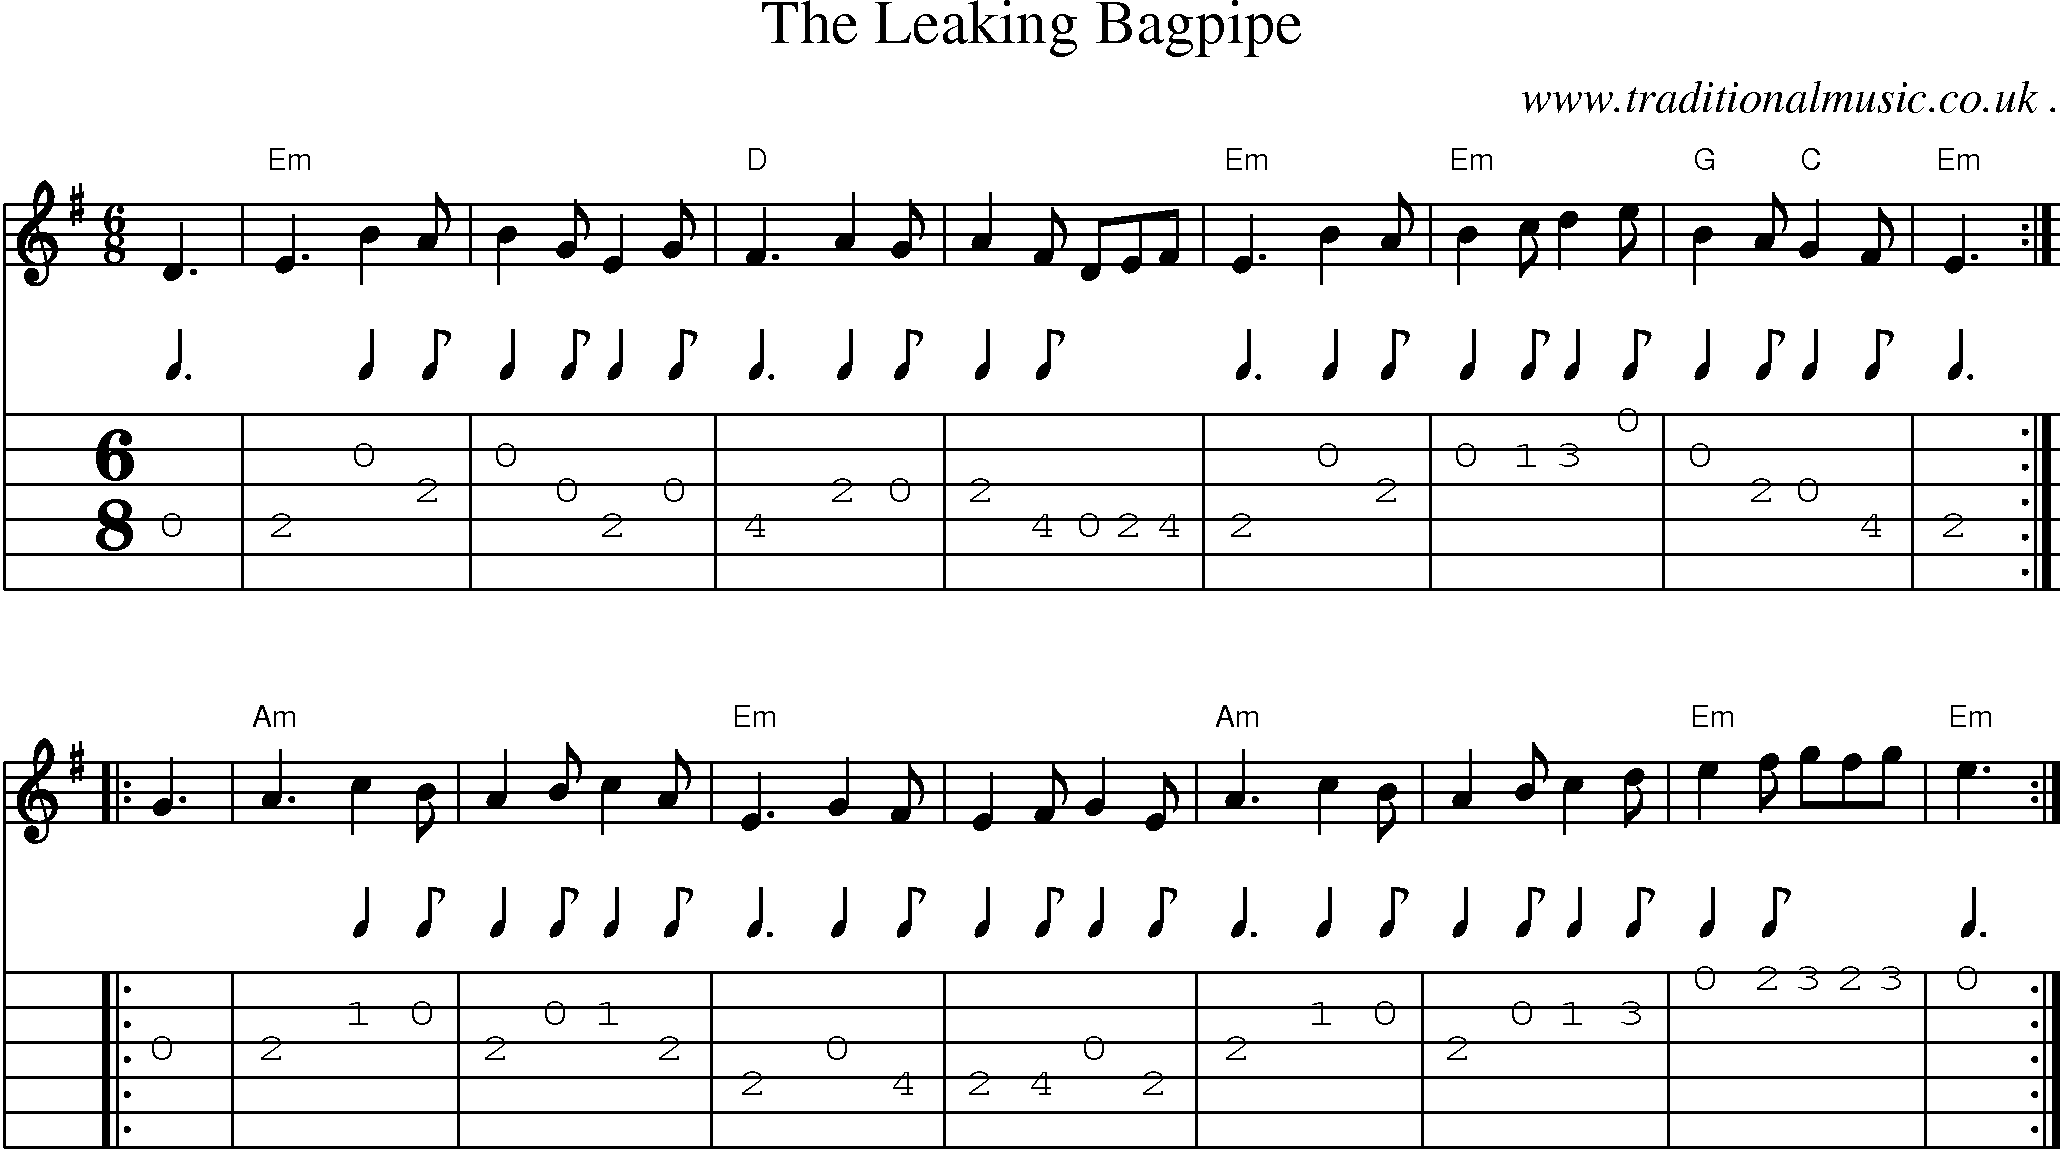 Sheet-Music and Guitar Tabs for The Leaking Bagpipe